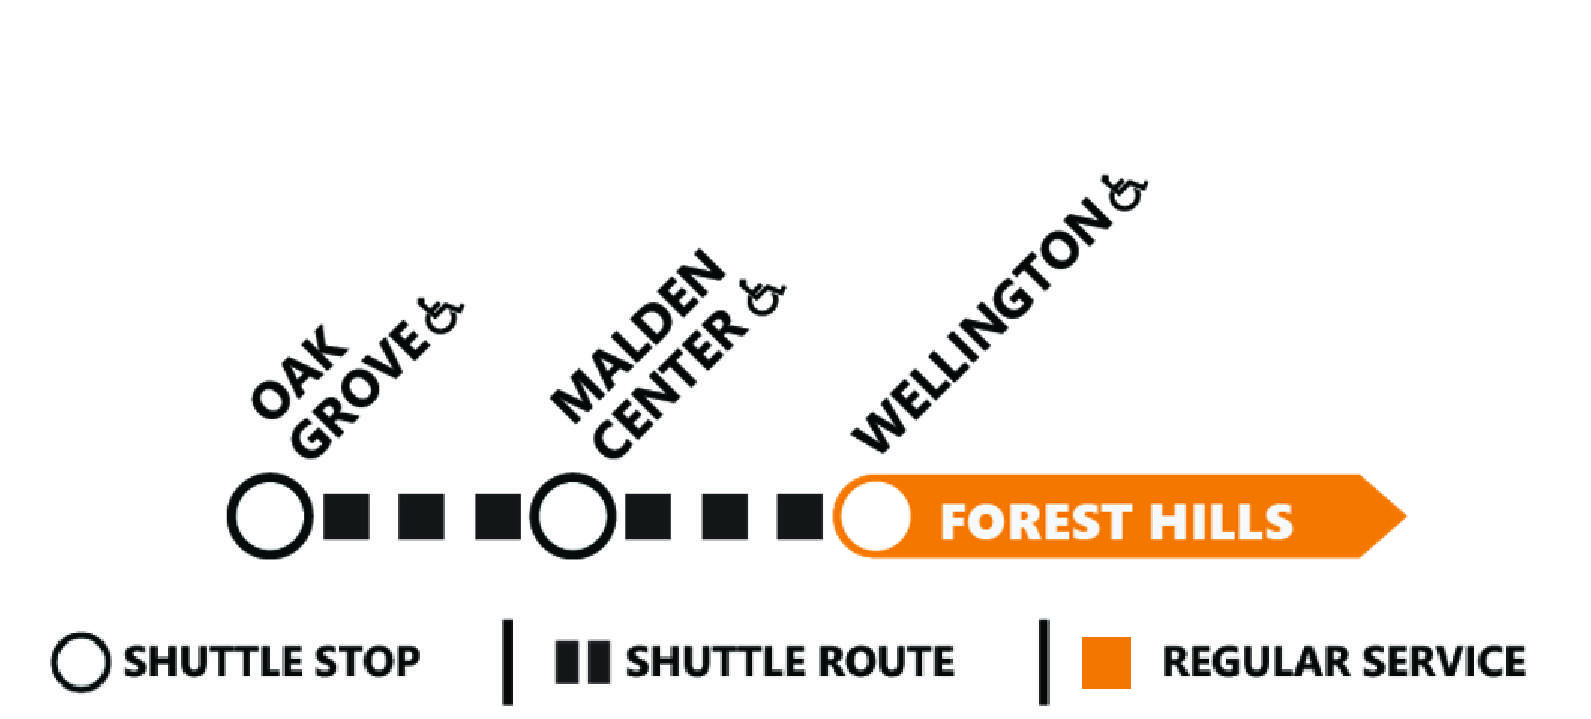 From July 29 through August 28, shuttle buses will replace Orange Line train service in both directions between Oak Grove and Wellington.